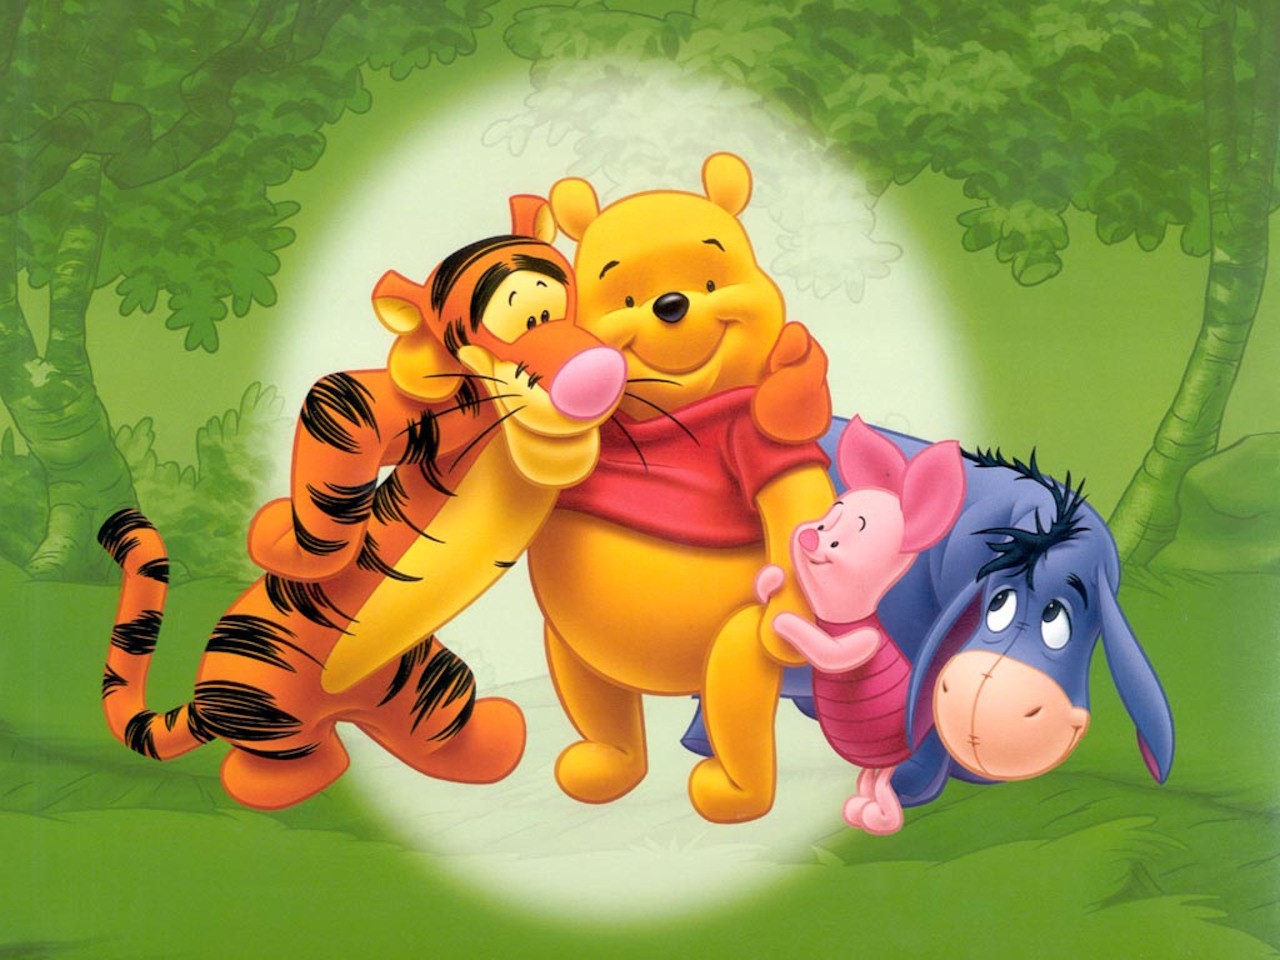 Free Winnie The Pooh Wallpaper Winnie The Pooh Pictures Gallery